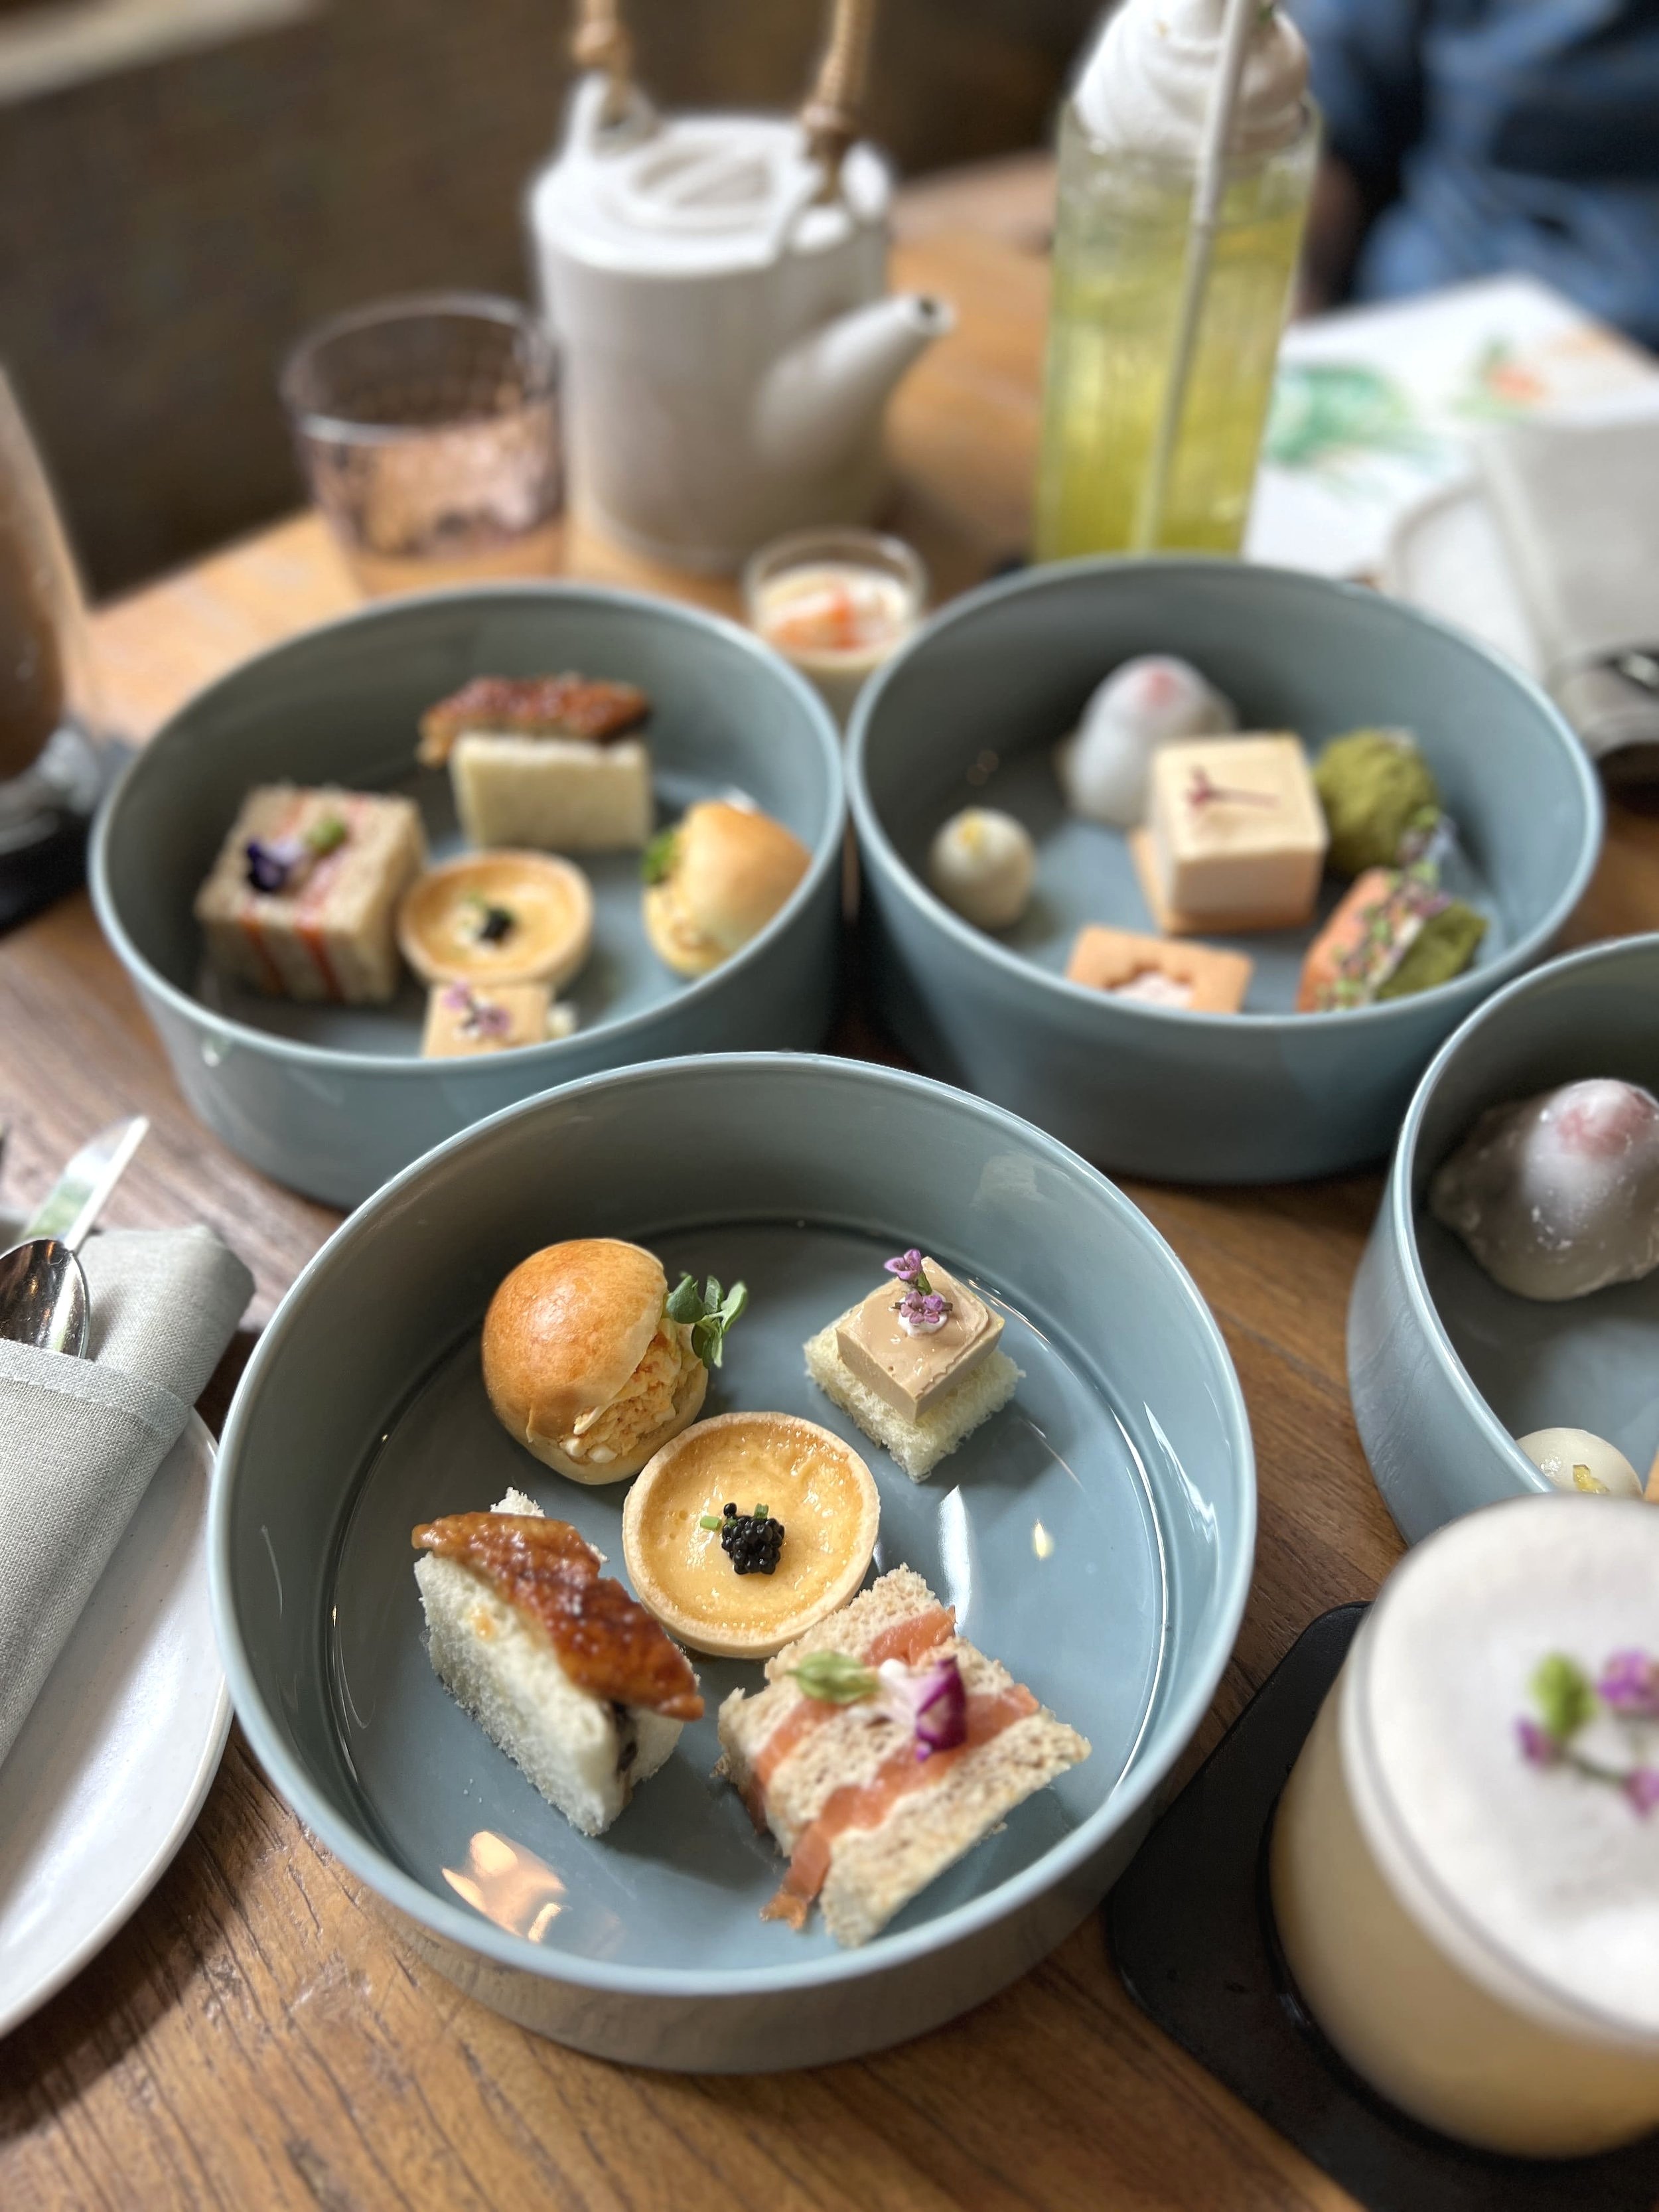 Four Seasons Afternoon tea Singapore review.